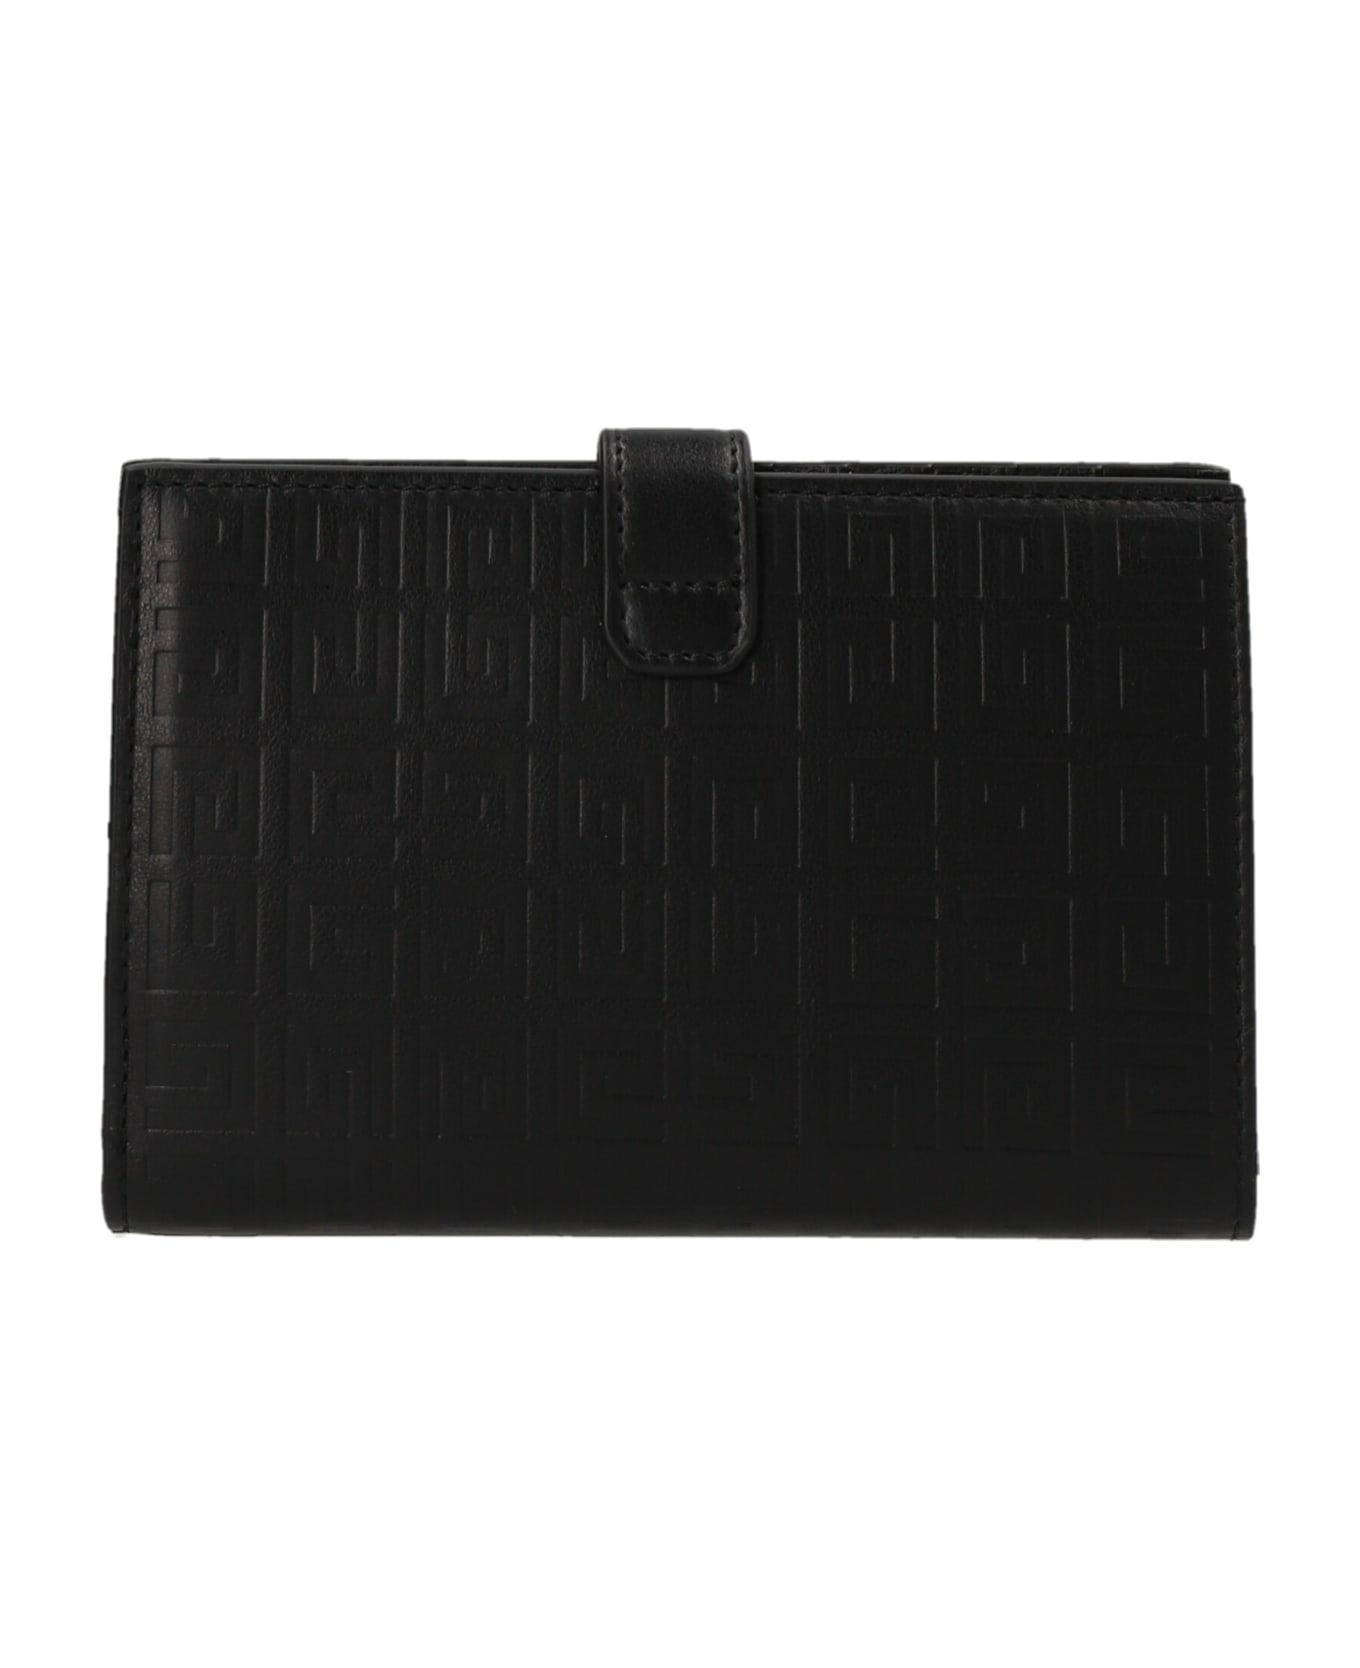 Givenchy G-cut Leather Wallet - White/Black